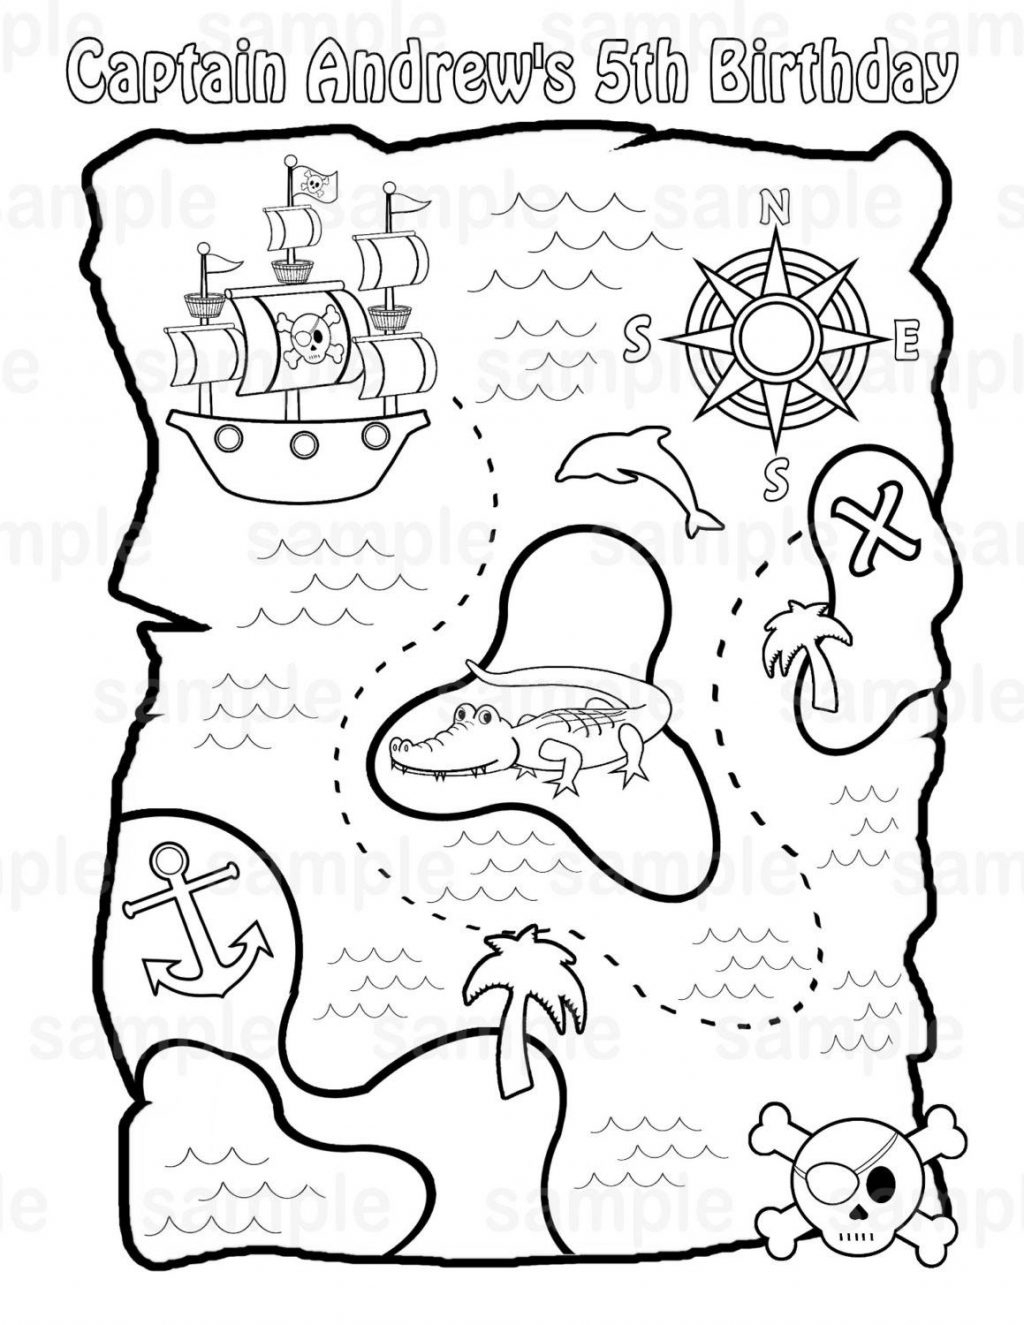 Coloring Pages ~ Treasure Map Coloring Pages Free Page Preschool - Free Printable Pirate Maps